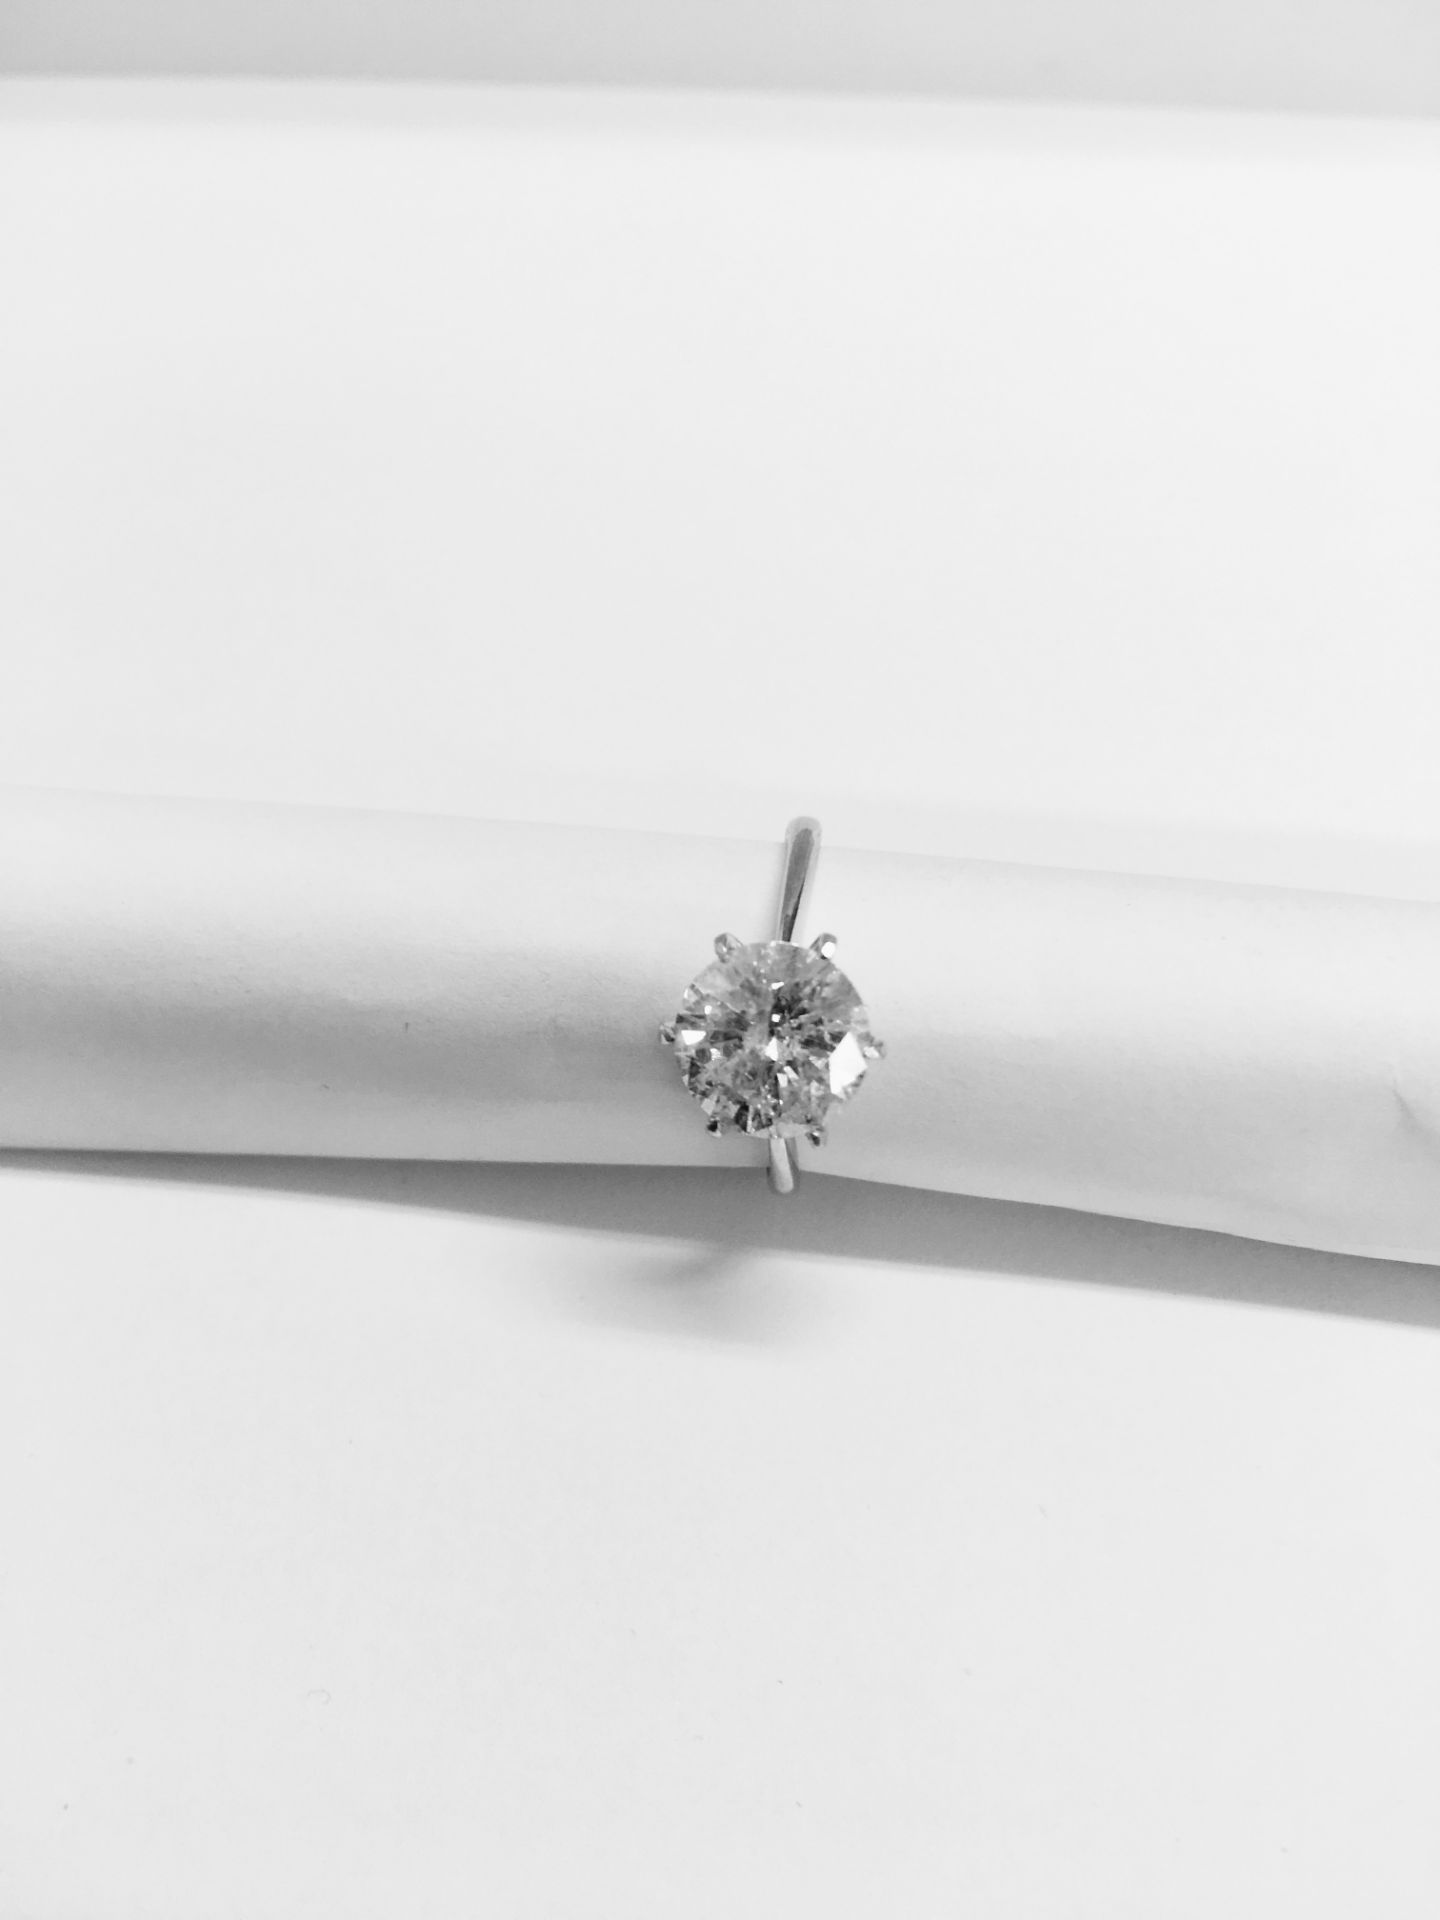 2.70ct diamond solitaire ring,h colour i1 quality (enhanced by laser drilling) diamond,5gms platinum - Image 4 of 7